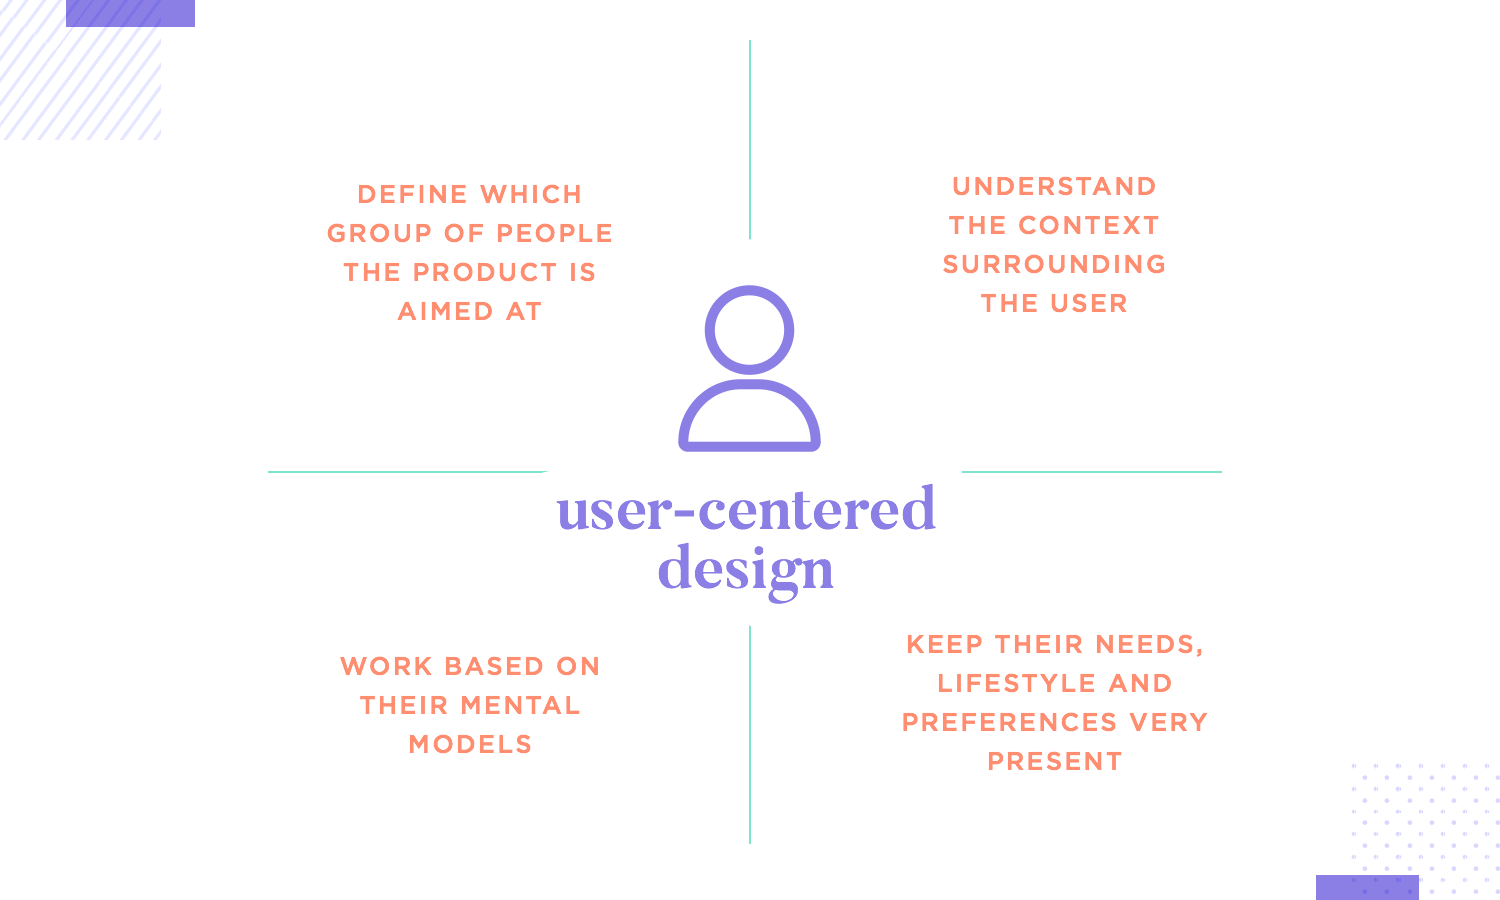 showing key aspects of user-centered desgin in ux